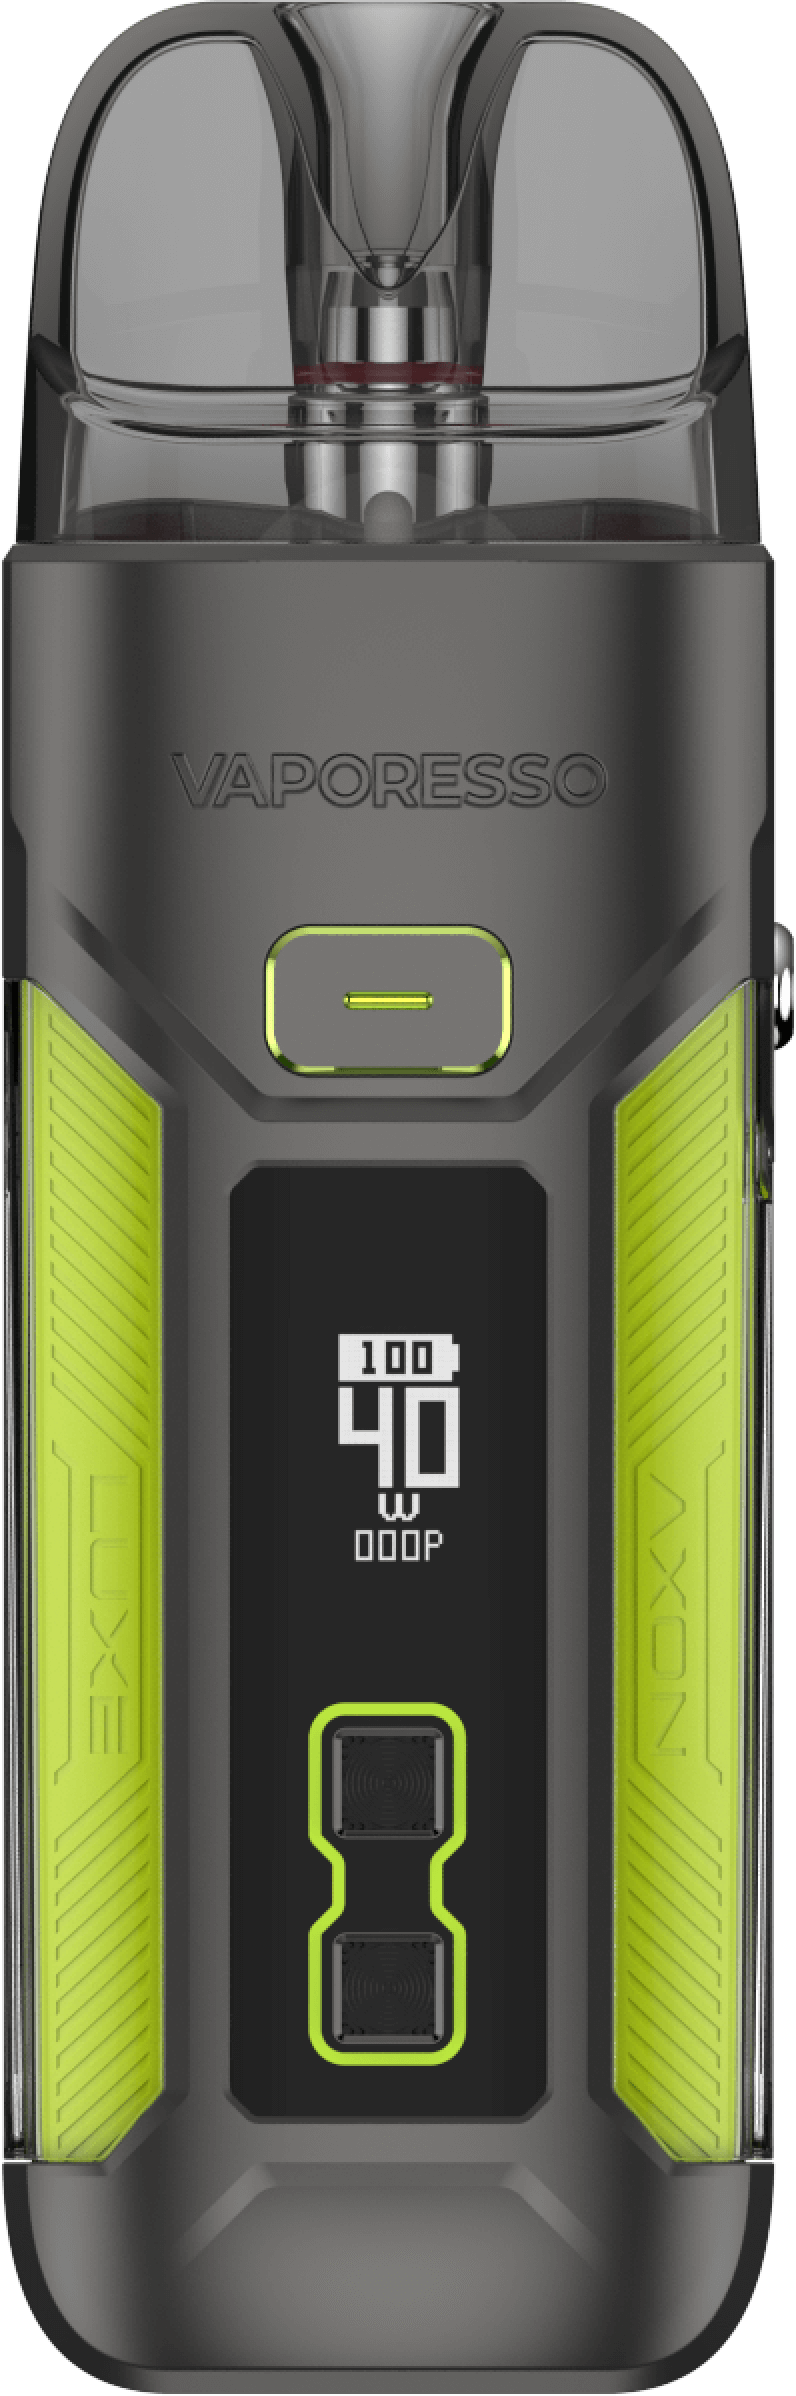 Vaporesso LUXE X Pro Pod System